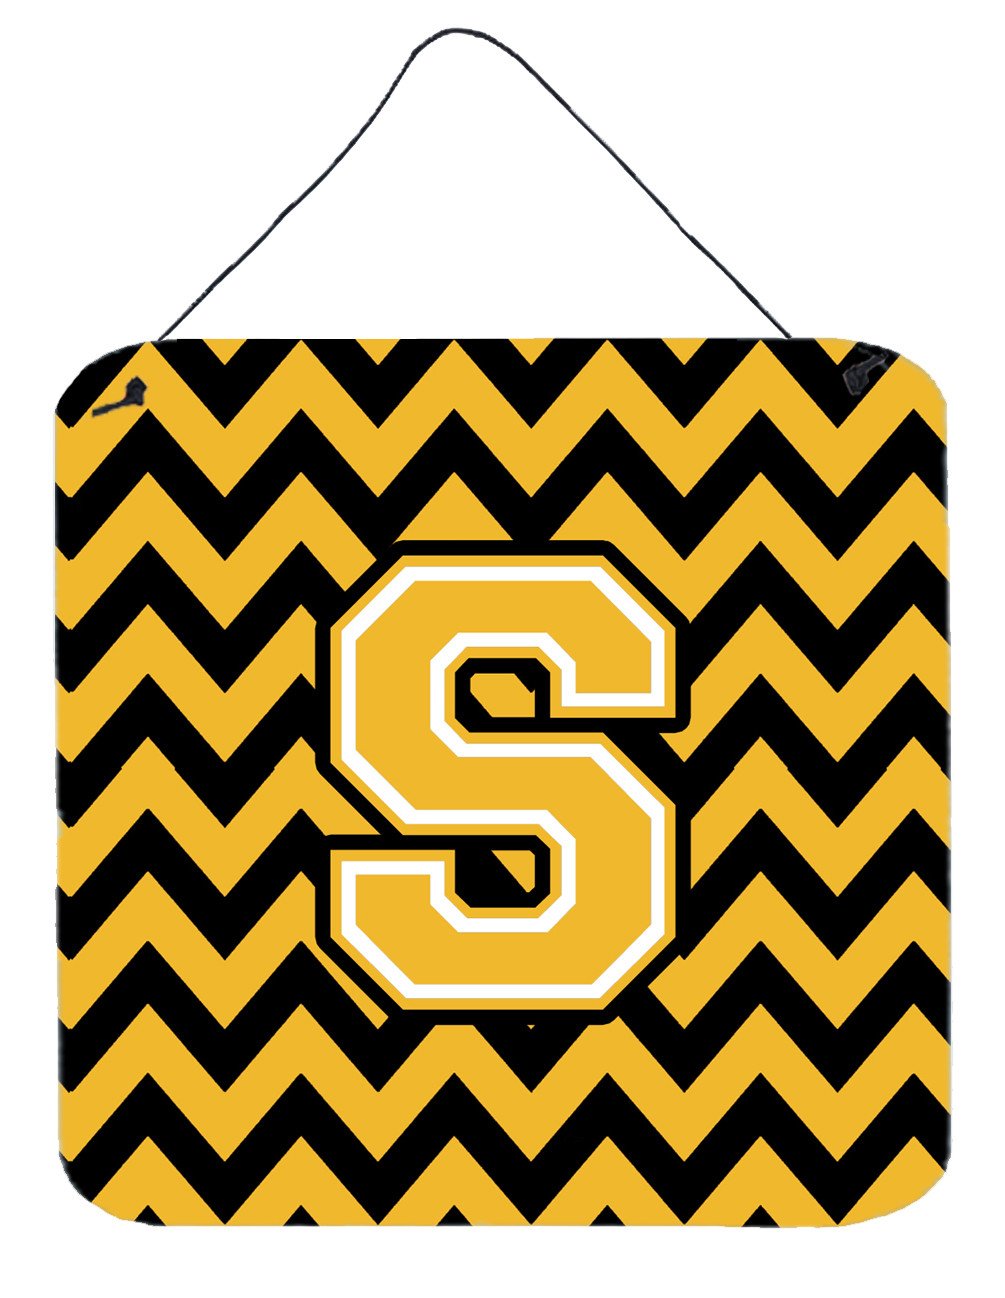 Letter S Chevron Black and Gold Wall or Door Hanging Prints CJ1053-SDS66 by Caroline's Treasures